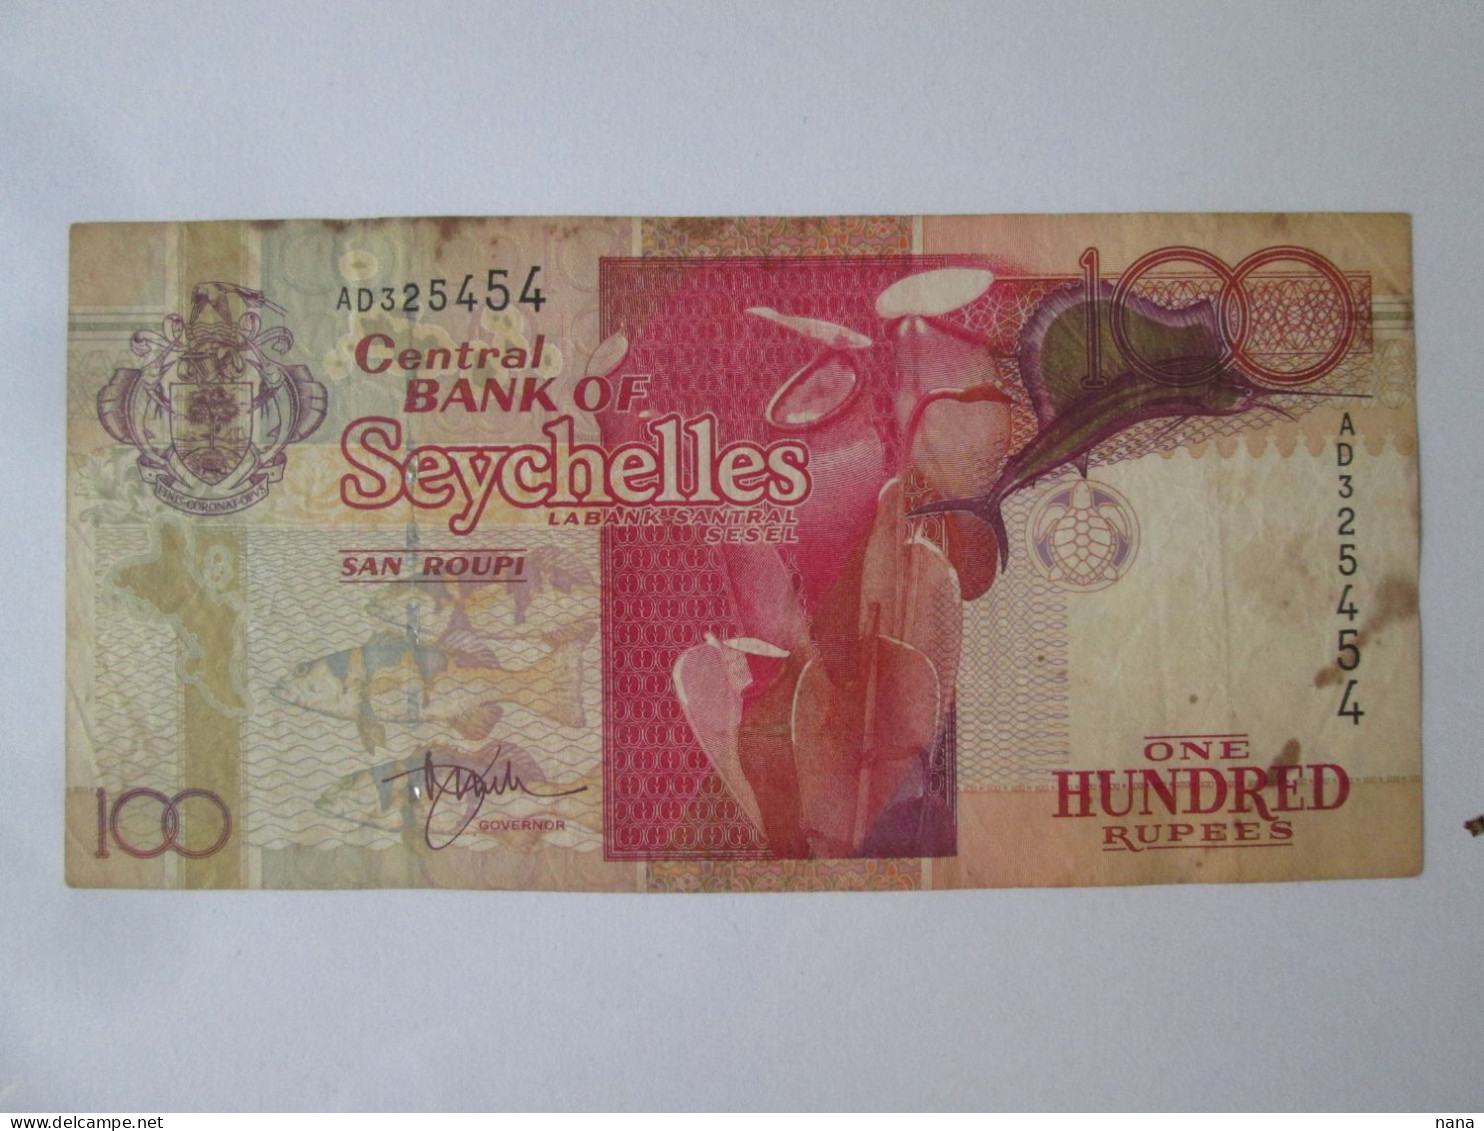 Seychelles 100 Rupees 1998 Banknote See Pictures - Seychelles